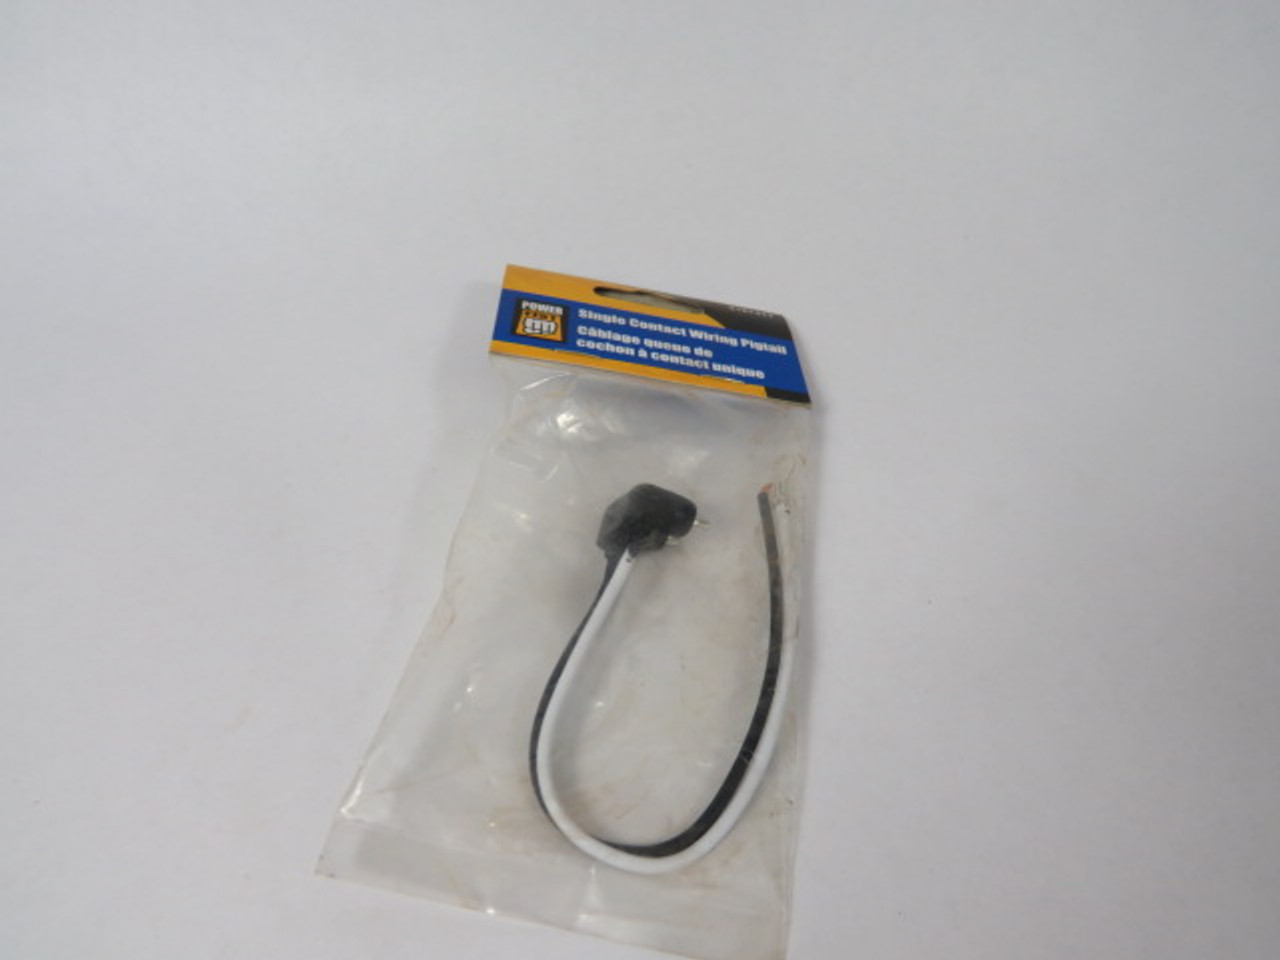 Power Fist 8187411 2-Wire Pigtail for Clearance/ Marker Light ! NWB !